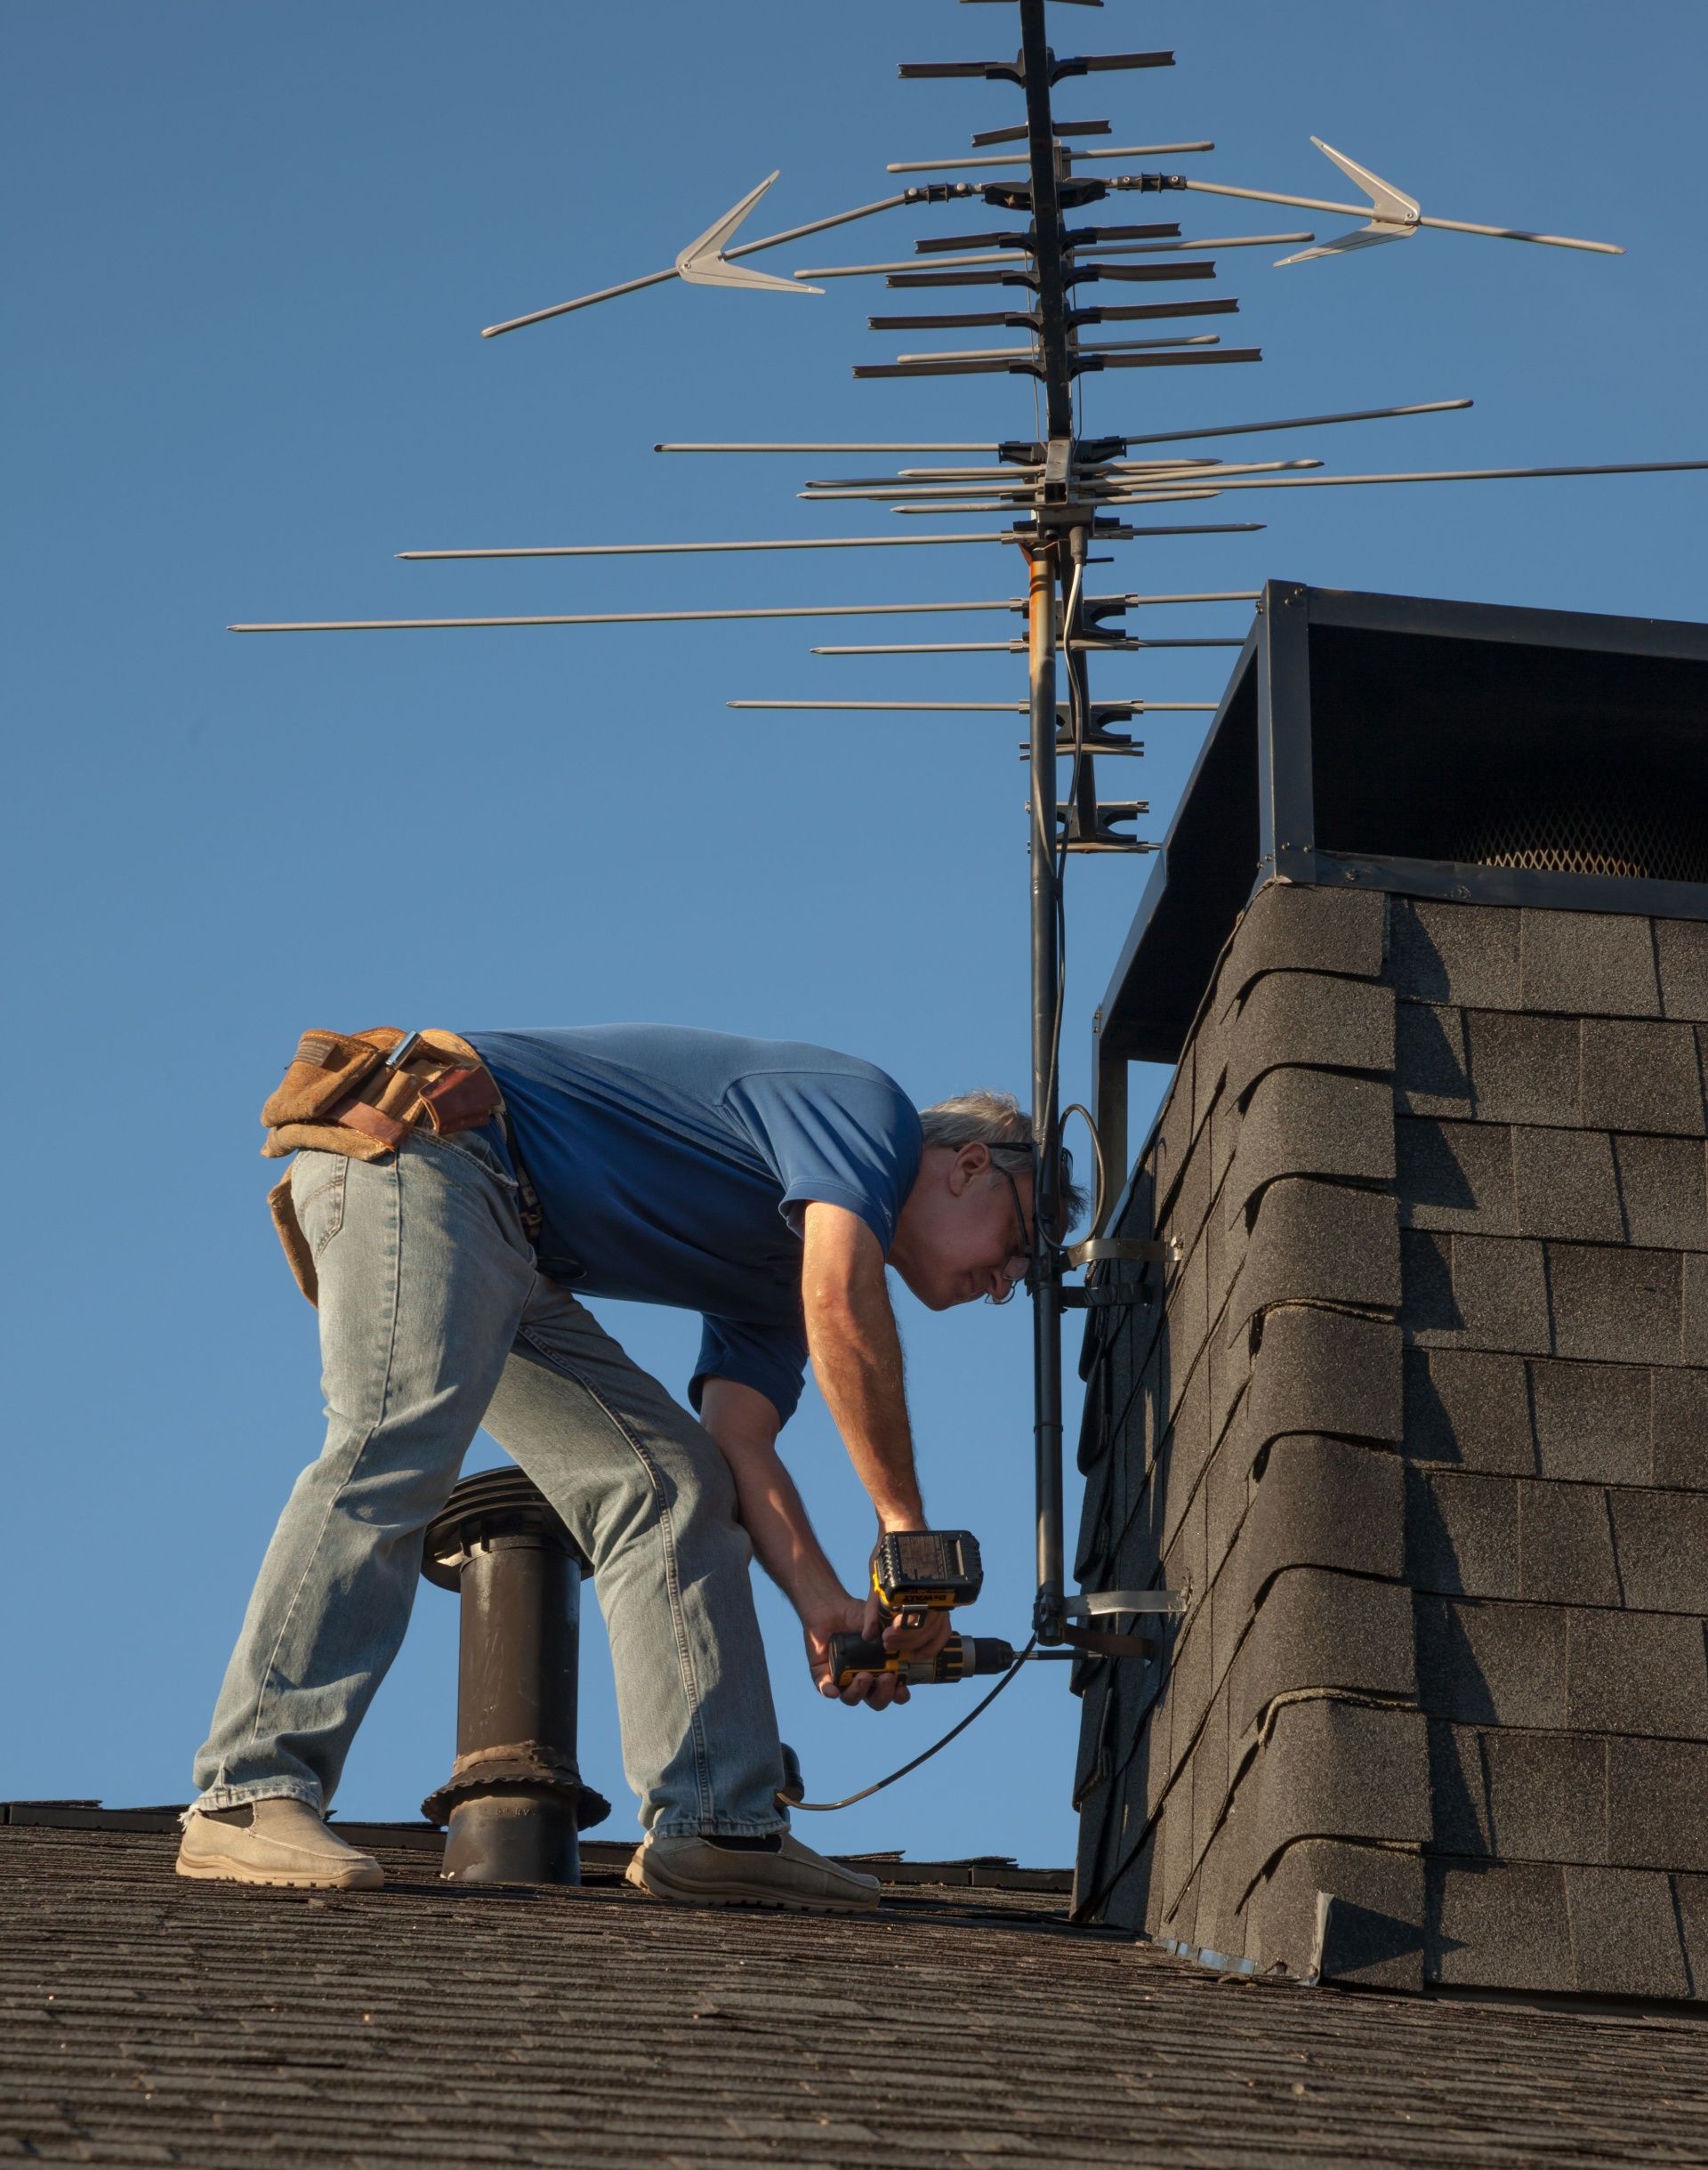 A man is working on an antenna on top of a roof